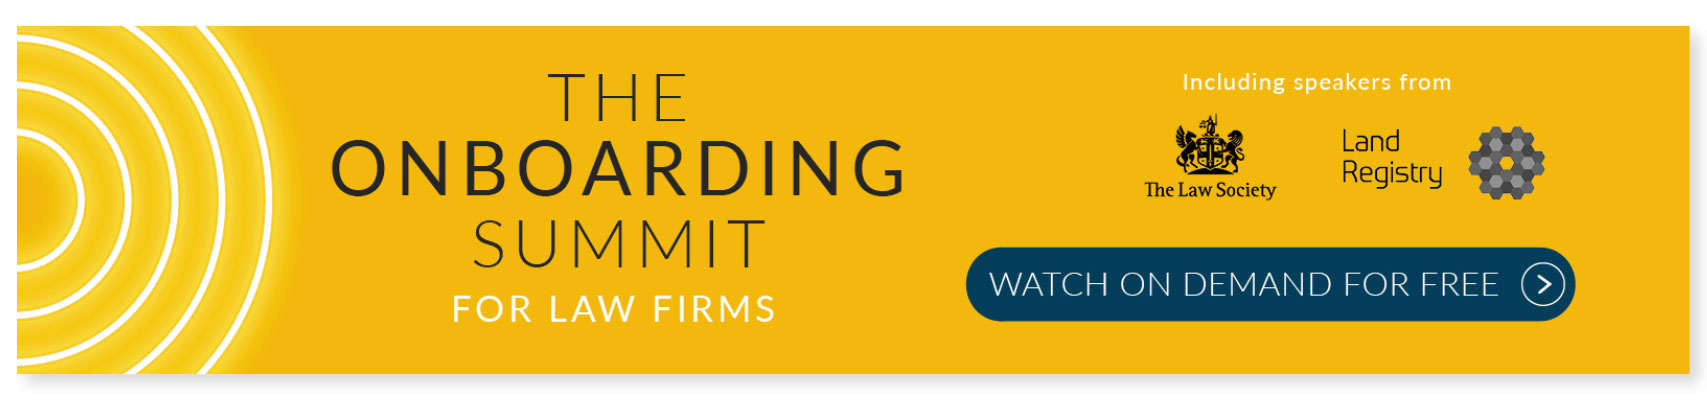 The onboarding summit watch now on demand banner